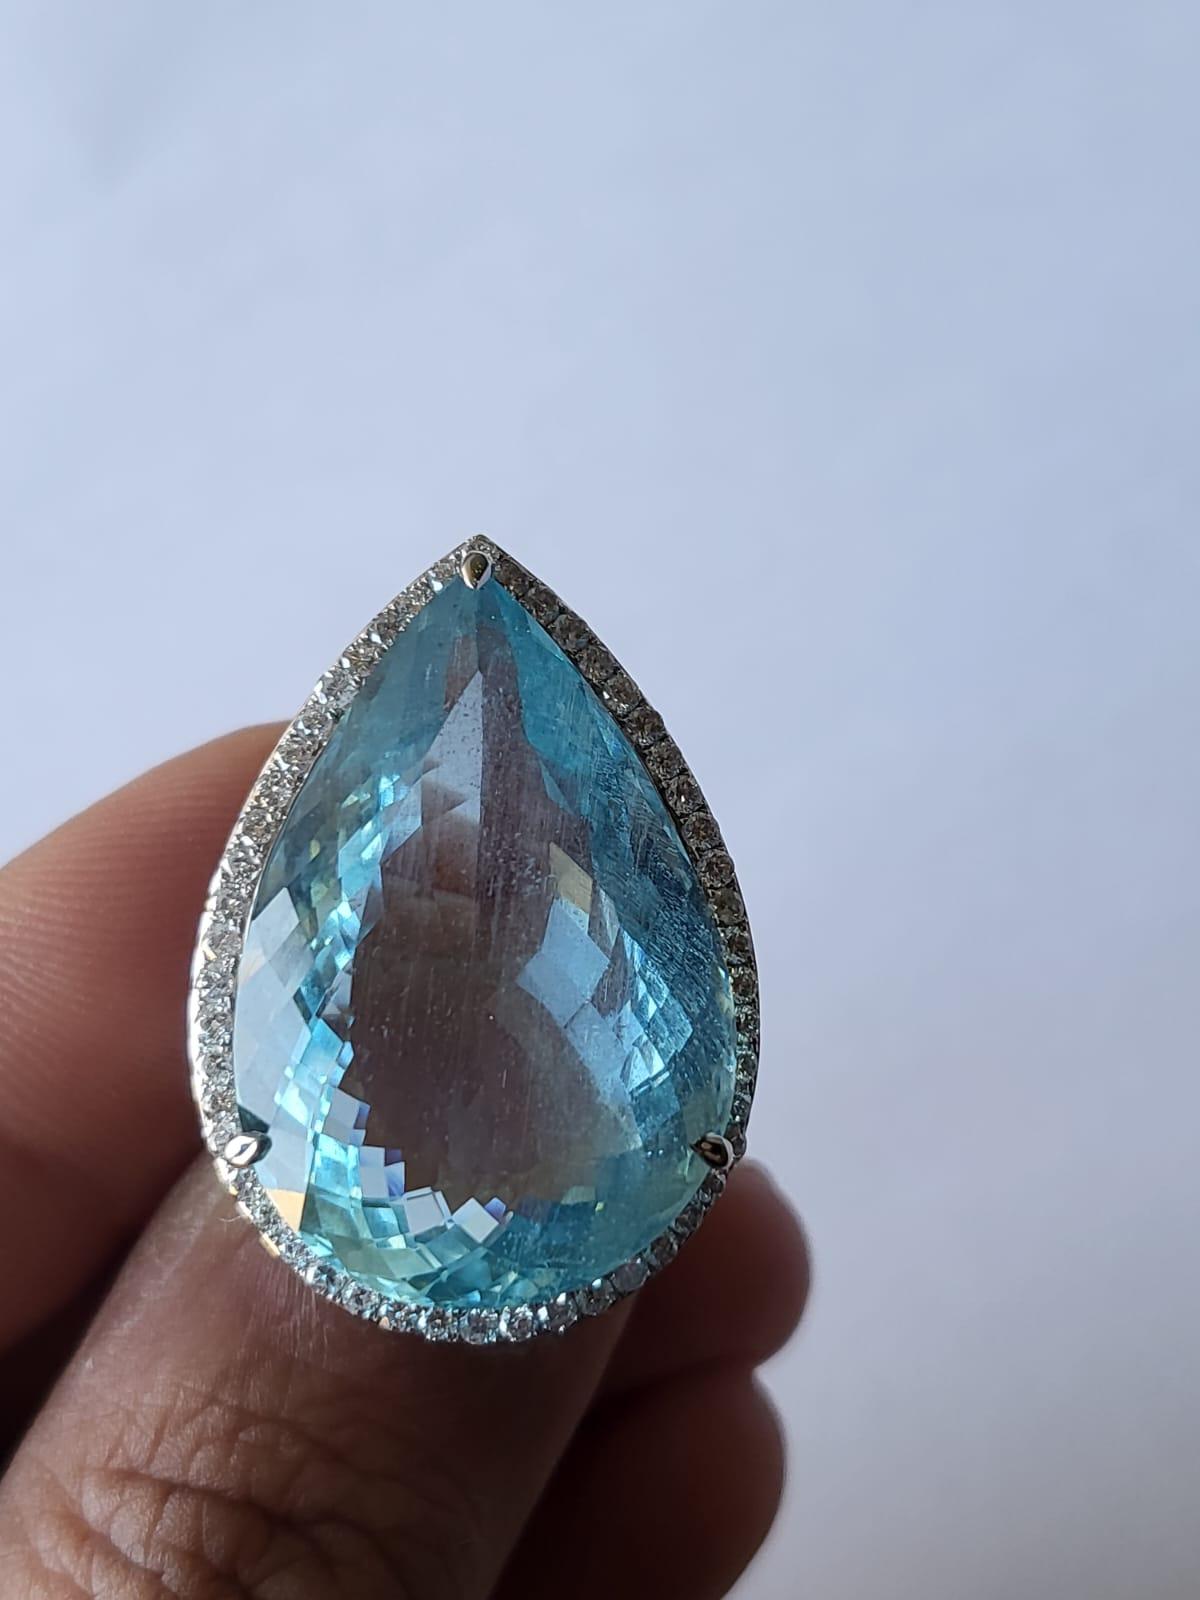 An exceptionally rare and one of a kind, Aquamarine Engagement / Cocktail Ring set in 18K White Gold & Diamonds. The weight of the pear shaped Aquamarine is 31.25 carats. The weight of the Diamonds is 0.96 carats. Net Gold weight is 7.91 grams. The